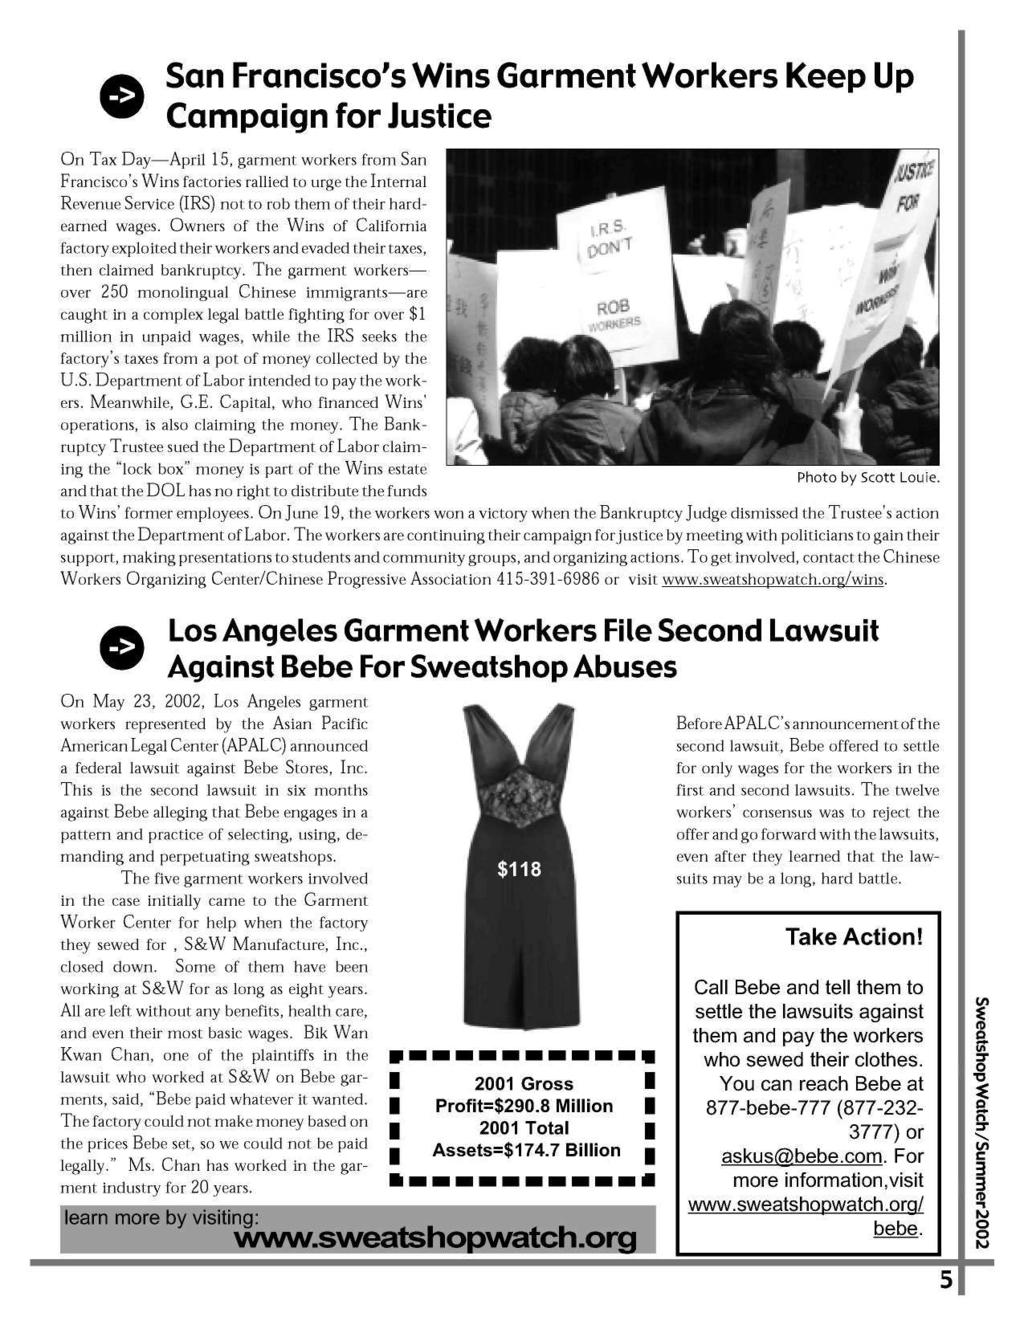 Cr San Francisco s Wins Garment Workers Keep Up Campaign for Justice On Tax Day April 15, garment workers from San Francisco s Wins factories rallied to urge the nternal Revenue Service (RS) not to